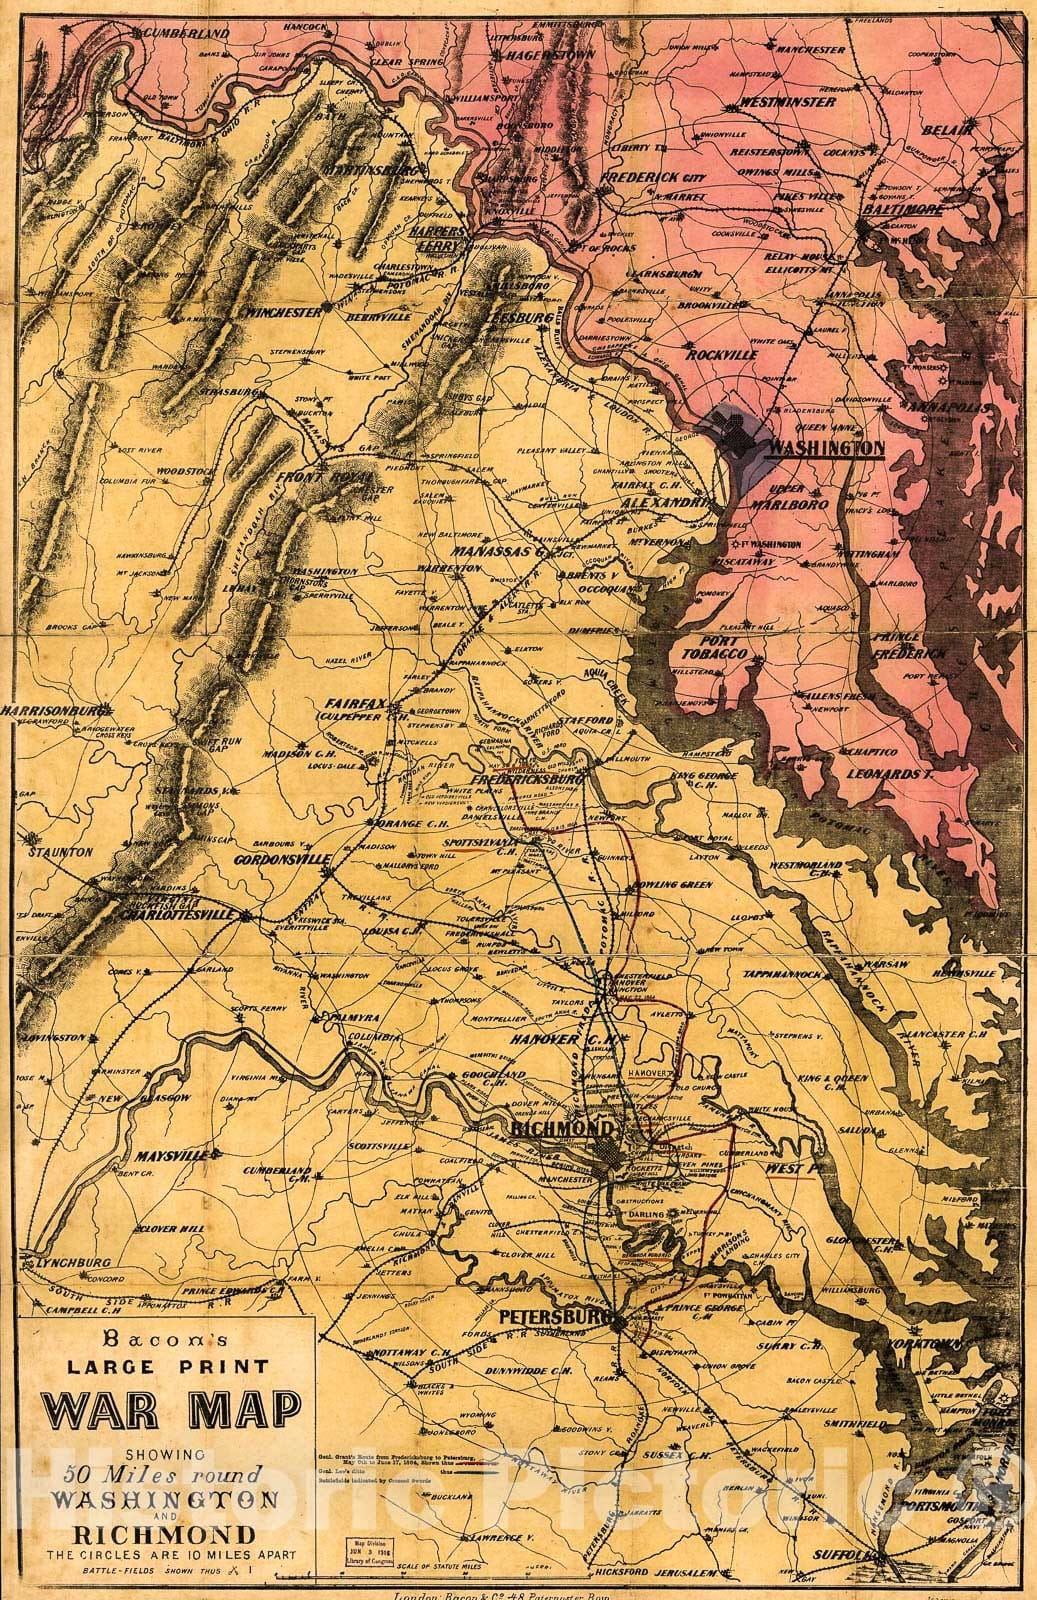 Historic 1864 Map - Bacon's Large Print war map Showing 50 Miles Round Washington and Richmond.